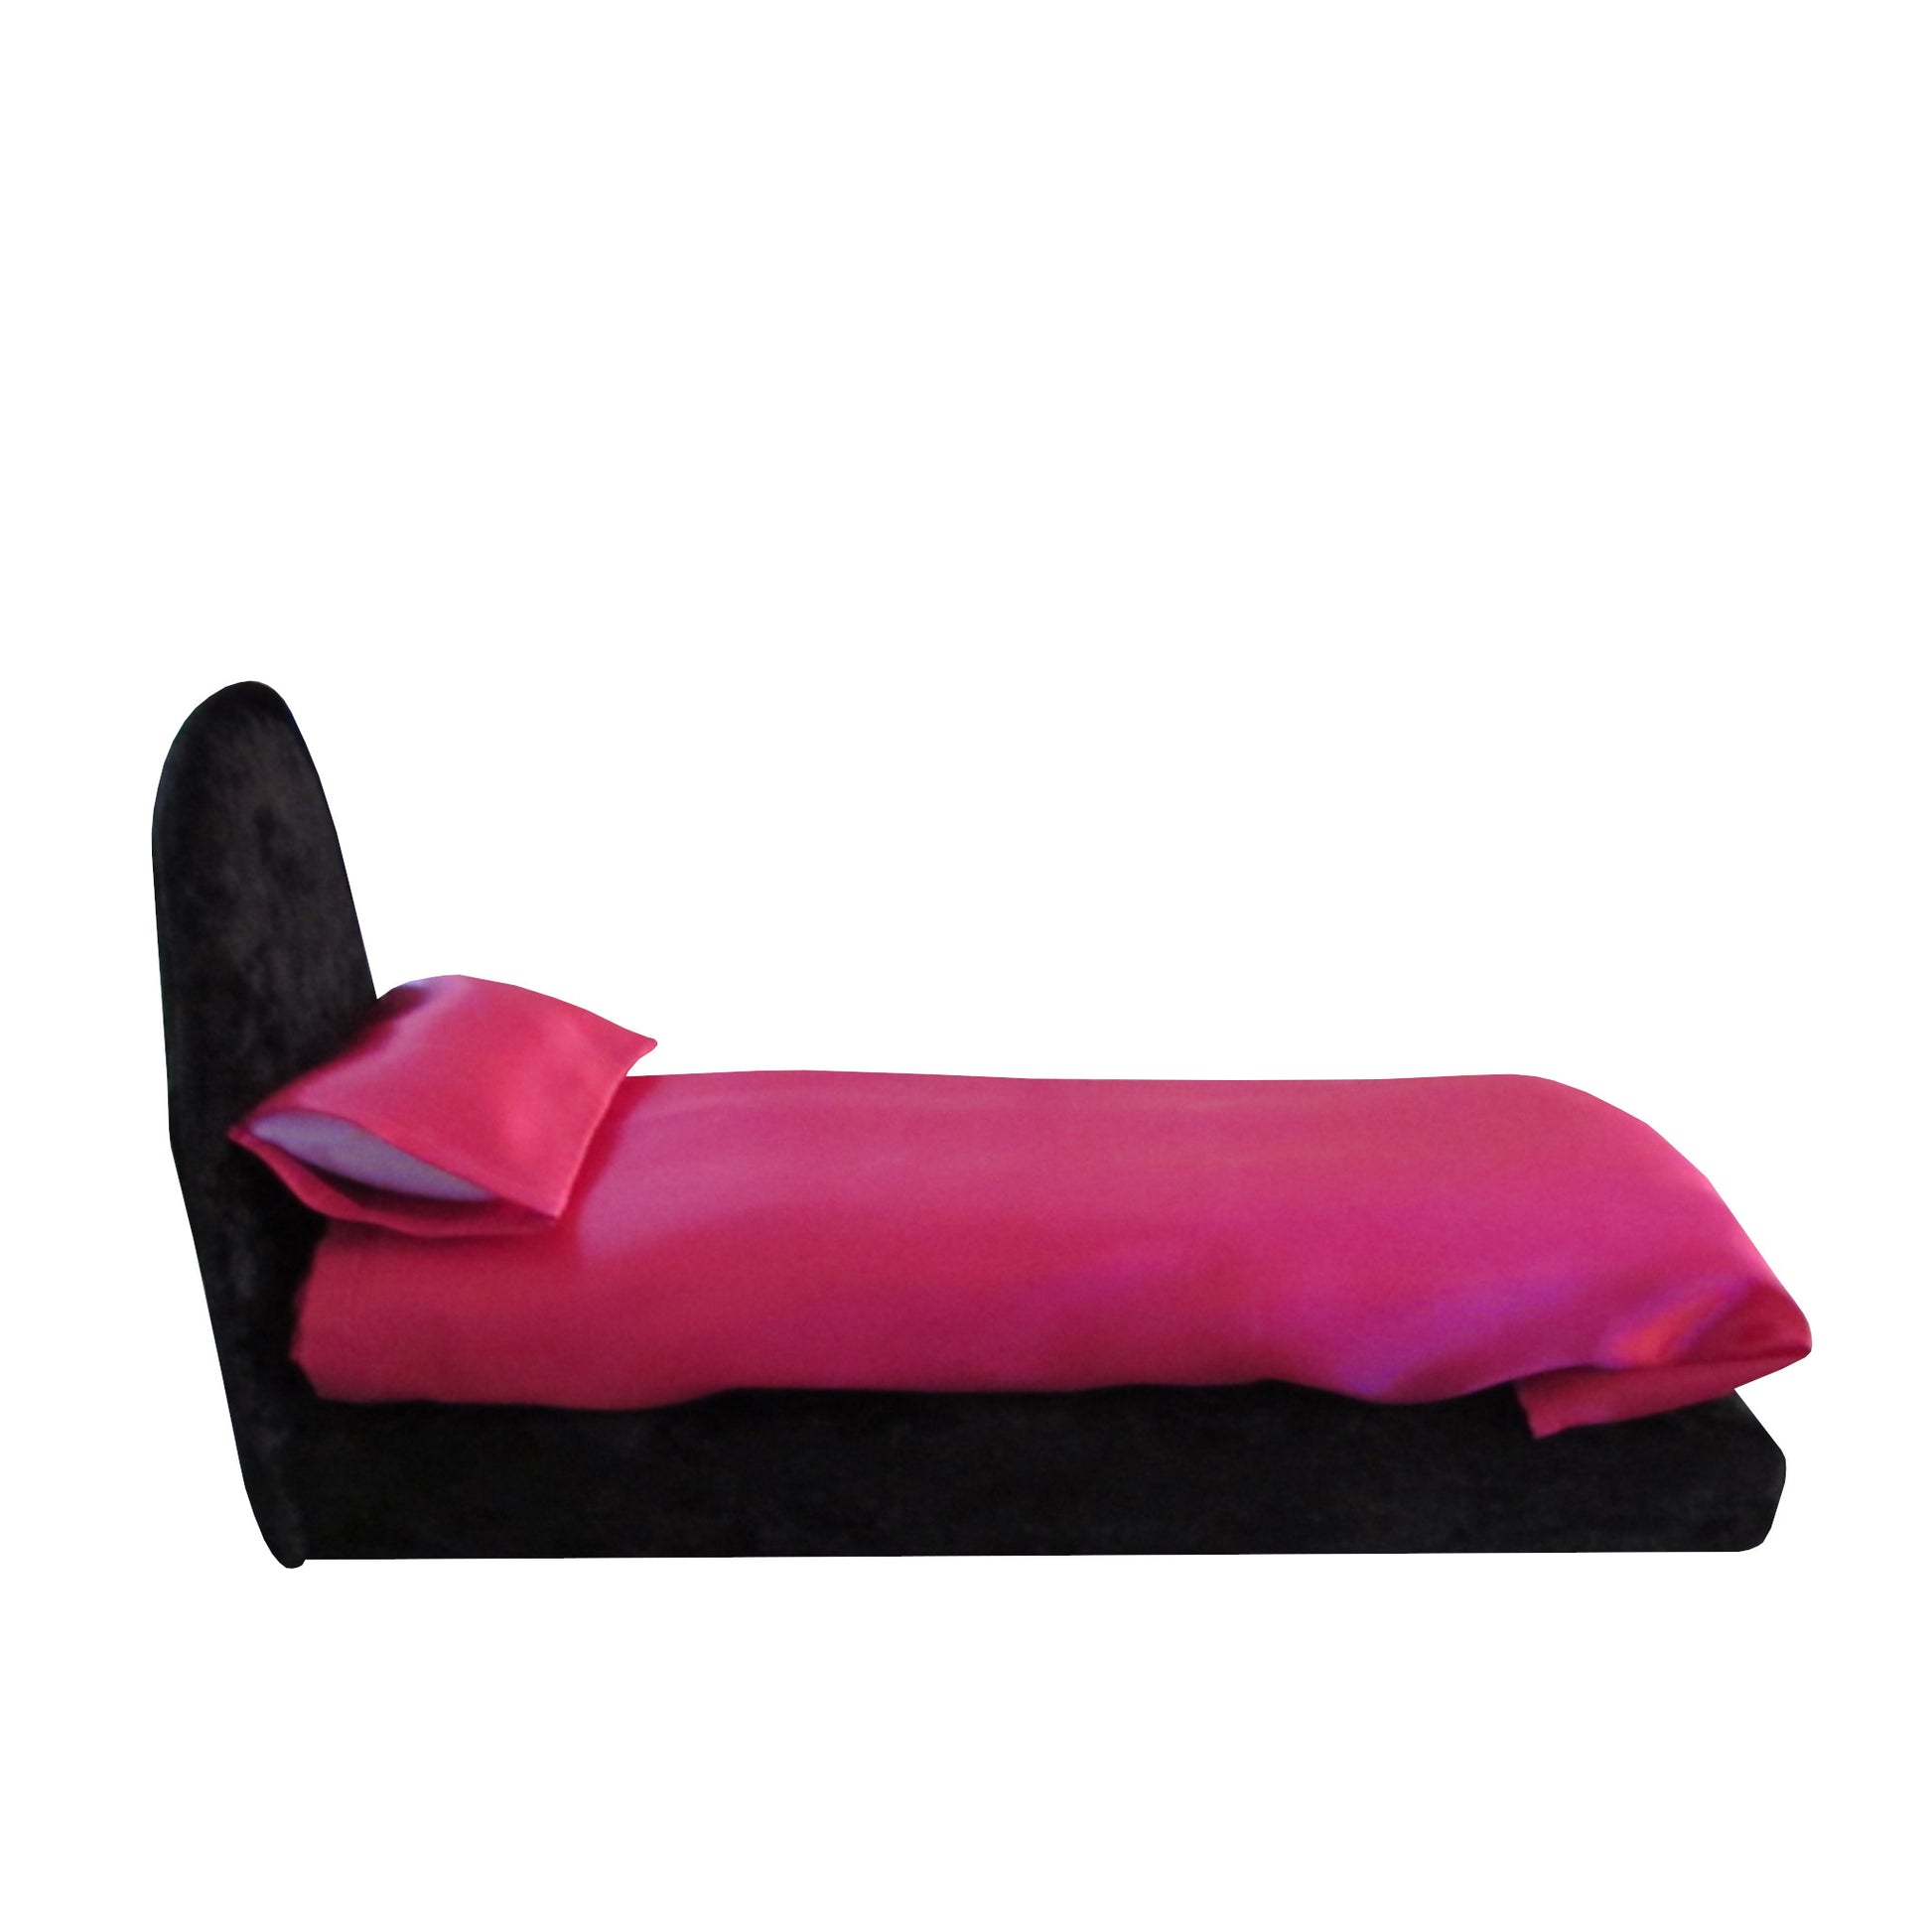 Magenta Satin Fitted, Flat Sheet, and Pillowcase with Black Crushed Velvet Doll Bed for 11.5-inch and 12-inch dolls Side view